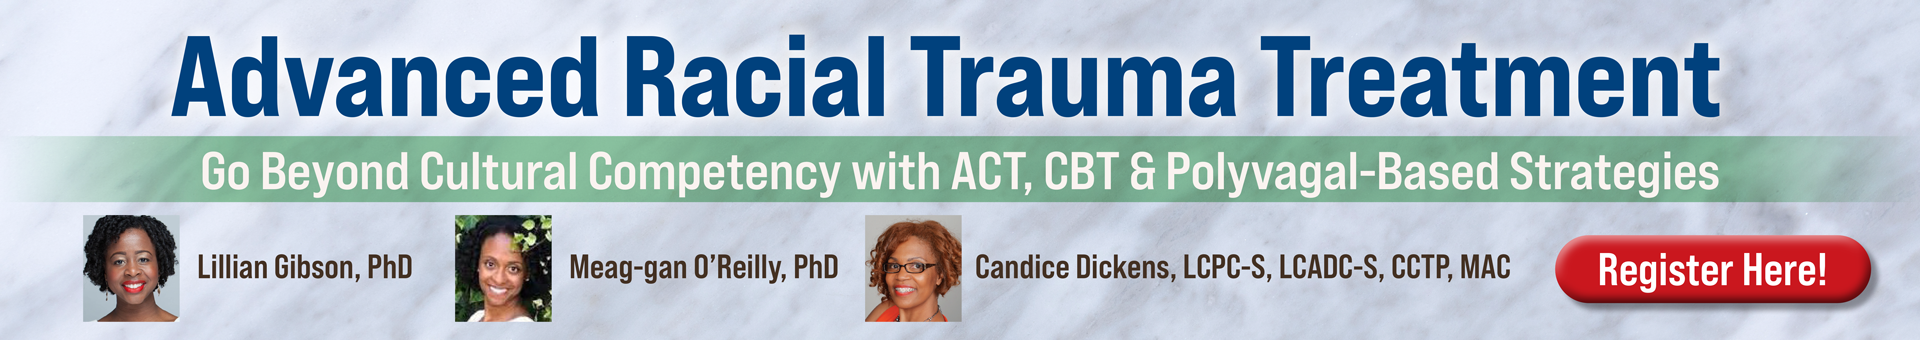 Advanced Racial Trauma Treatment: Go Beyond Cultural Competency with ACT, CBT & Polyvagal-Based Strategies